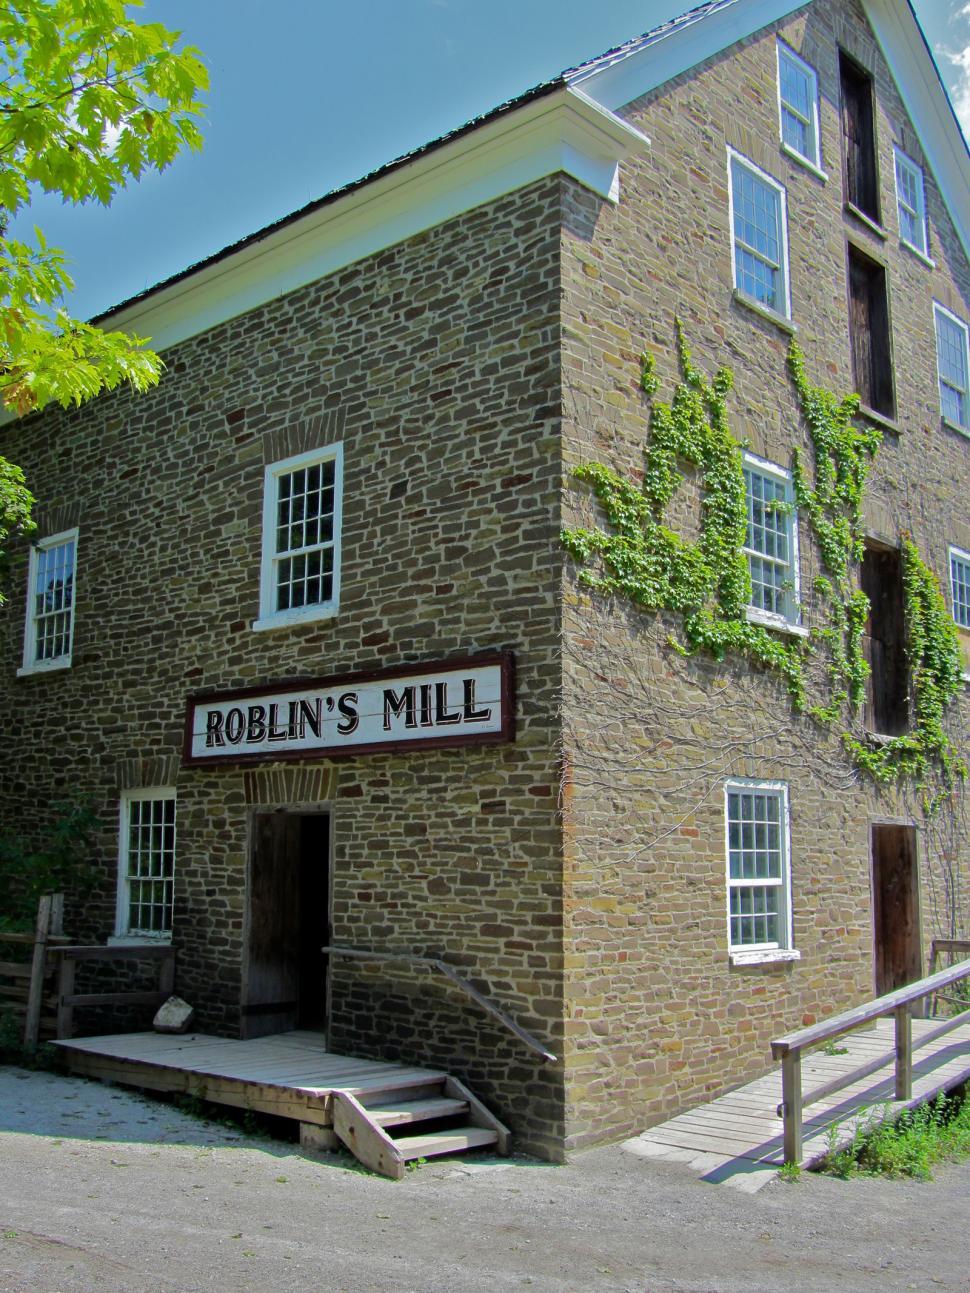 Free Image of Roblins Mill2 